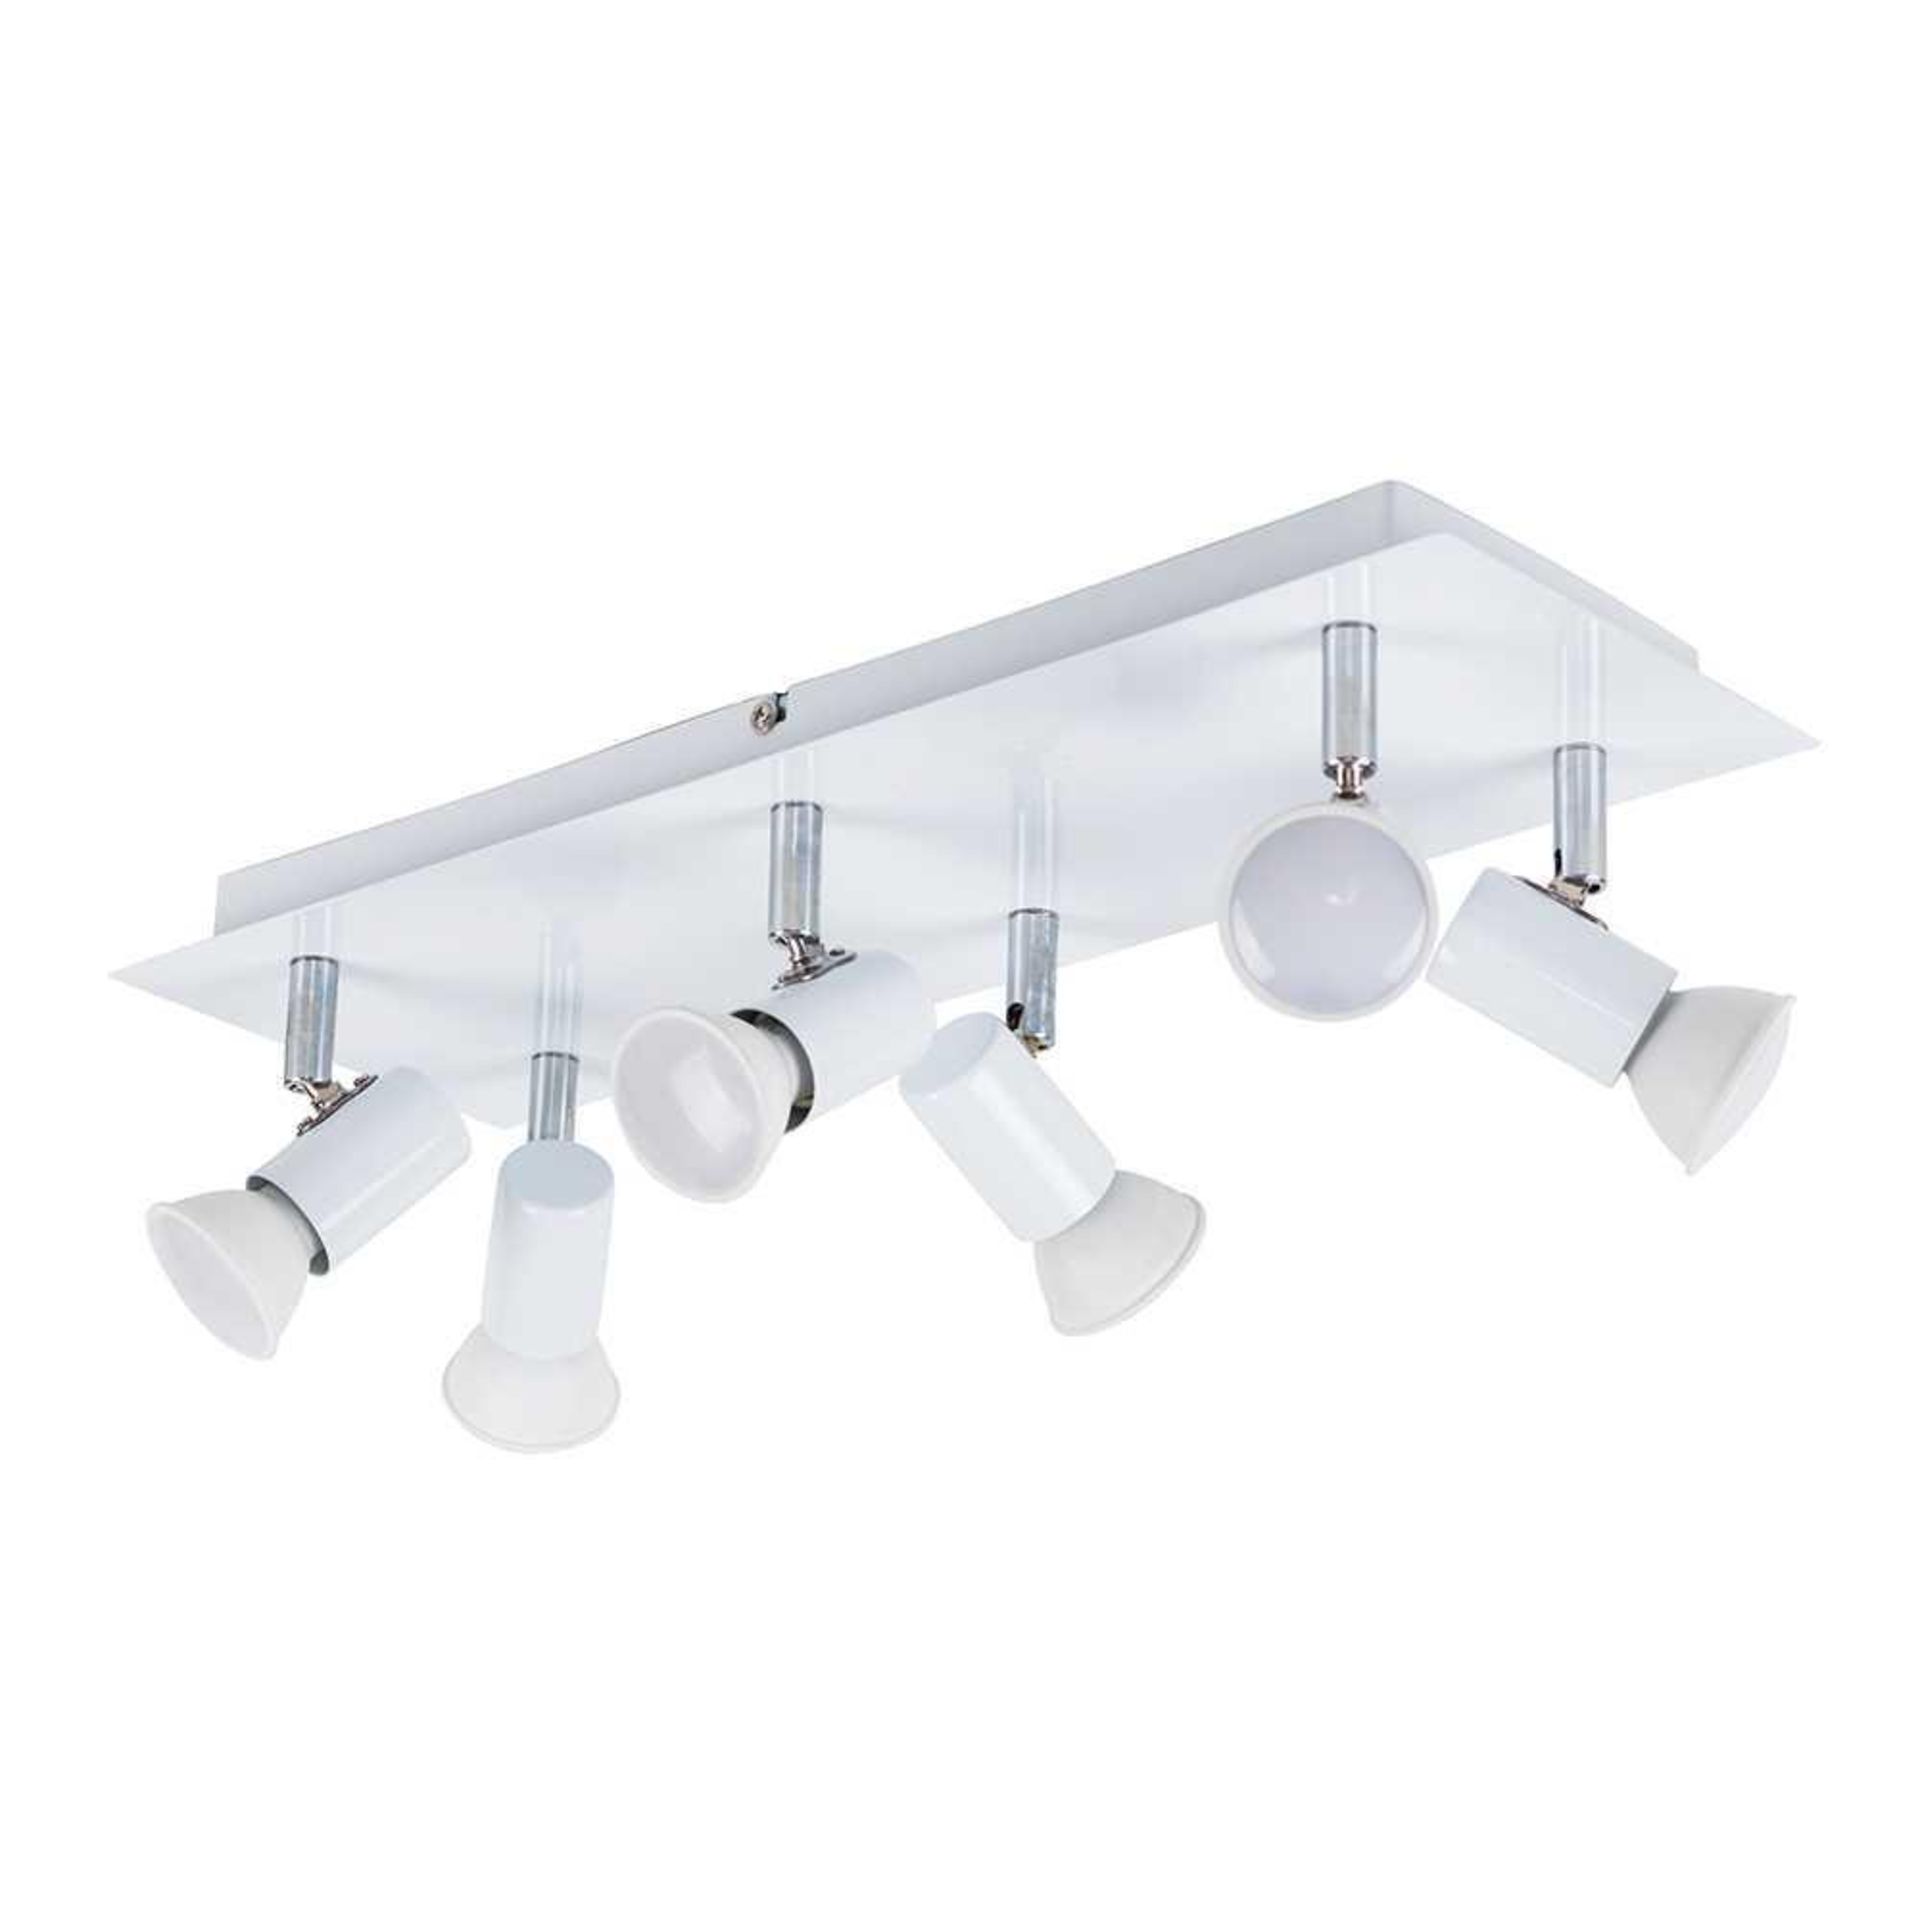 Rrp £100 Lot To Contain 2 Boxed Mini Sun White And Chrome 6-Way Rectangular Plate 6 Light Spotlight